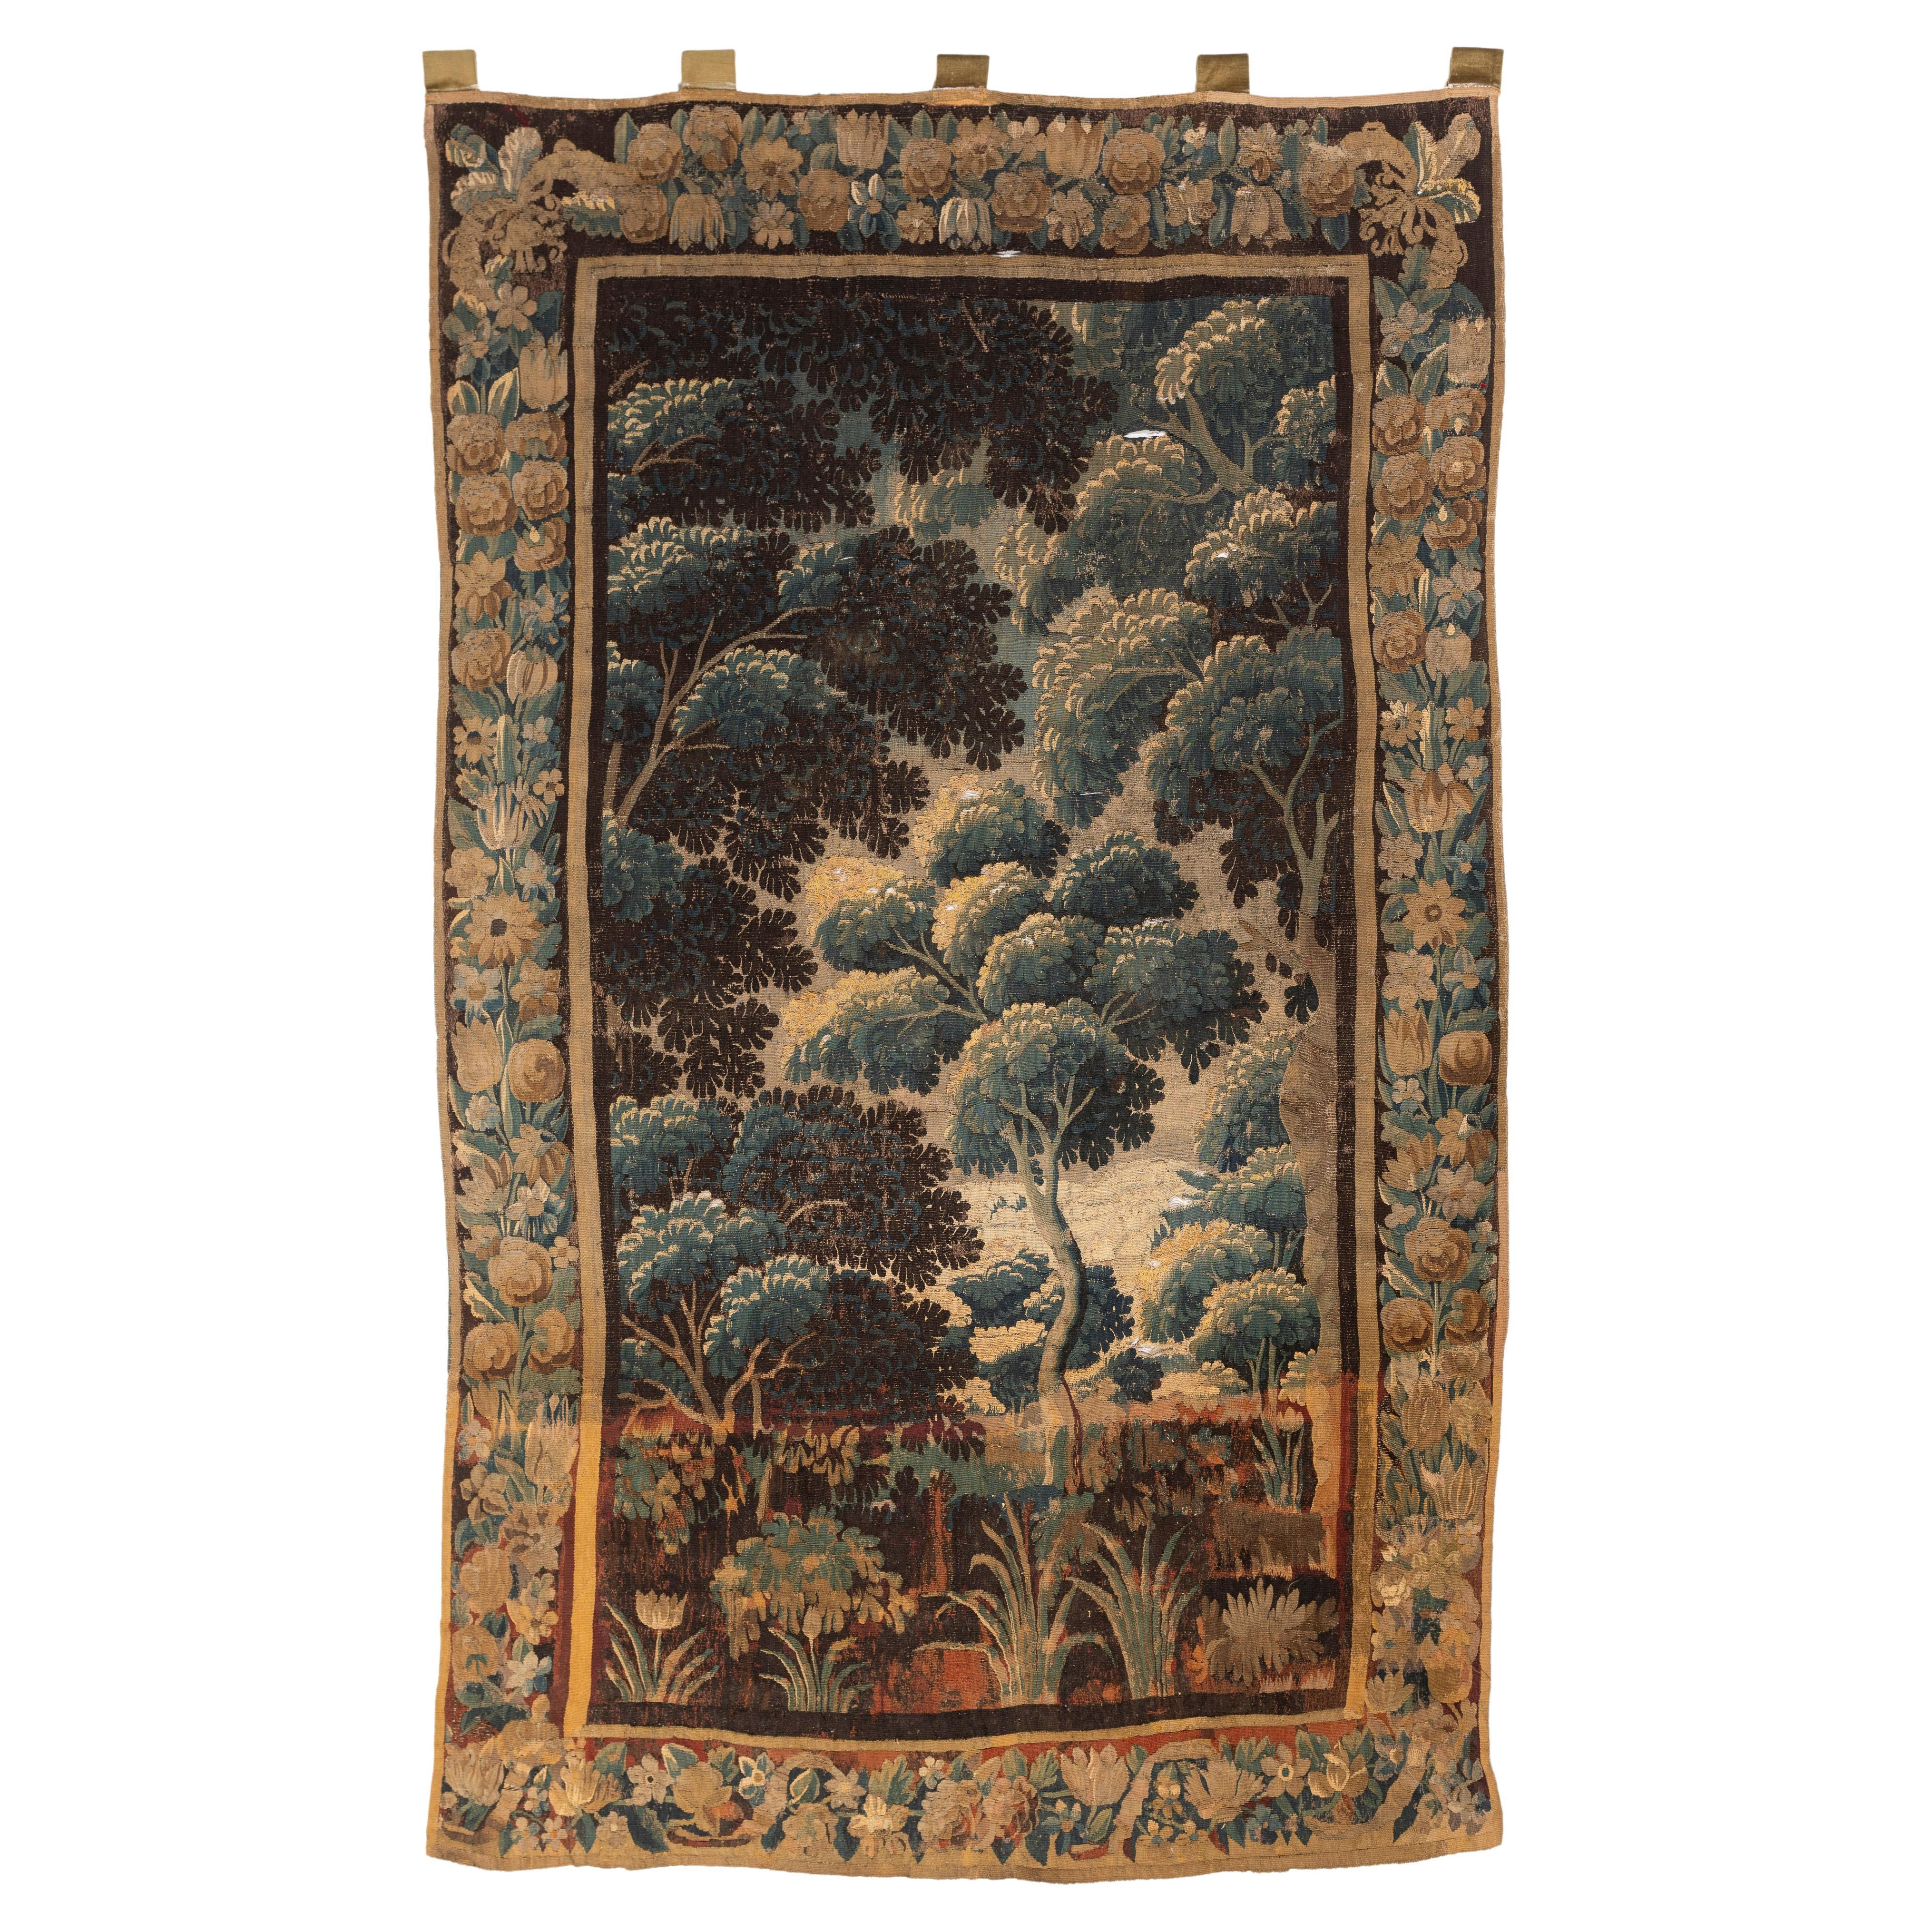 Hand-Woven Antique 17th Century Aubusson Verdure Tapestry, France For Sale